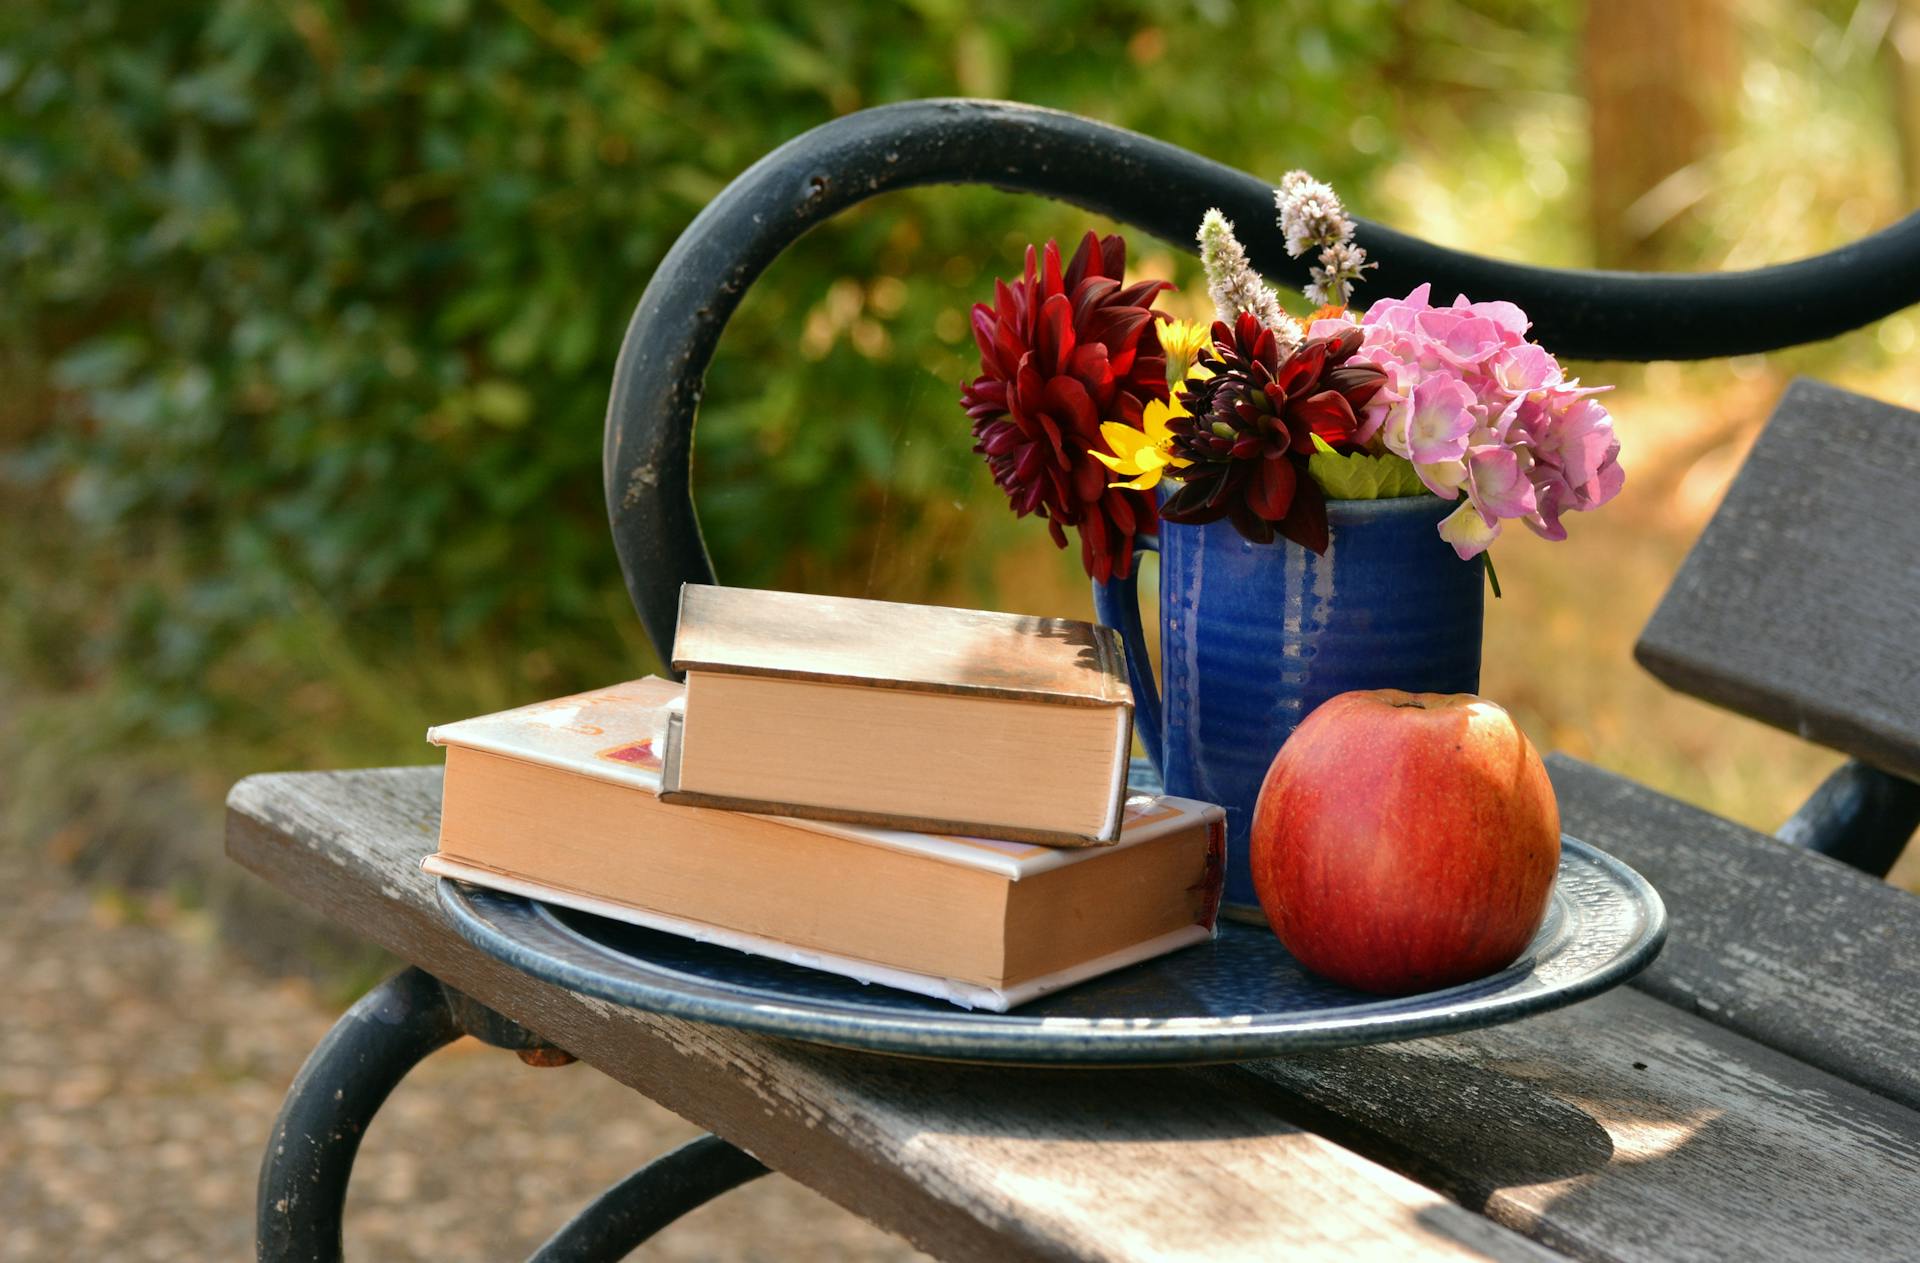 Two books placed on top of each other beside a flower vase and a red apple | Source: Pexels